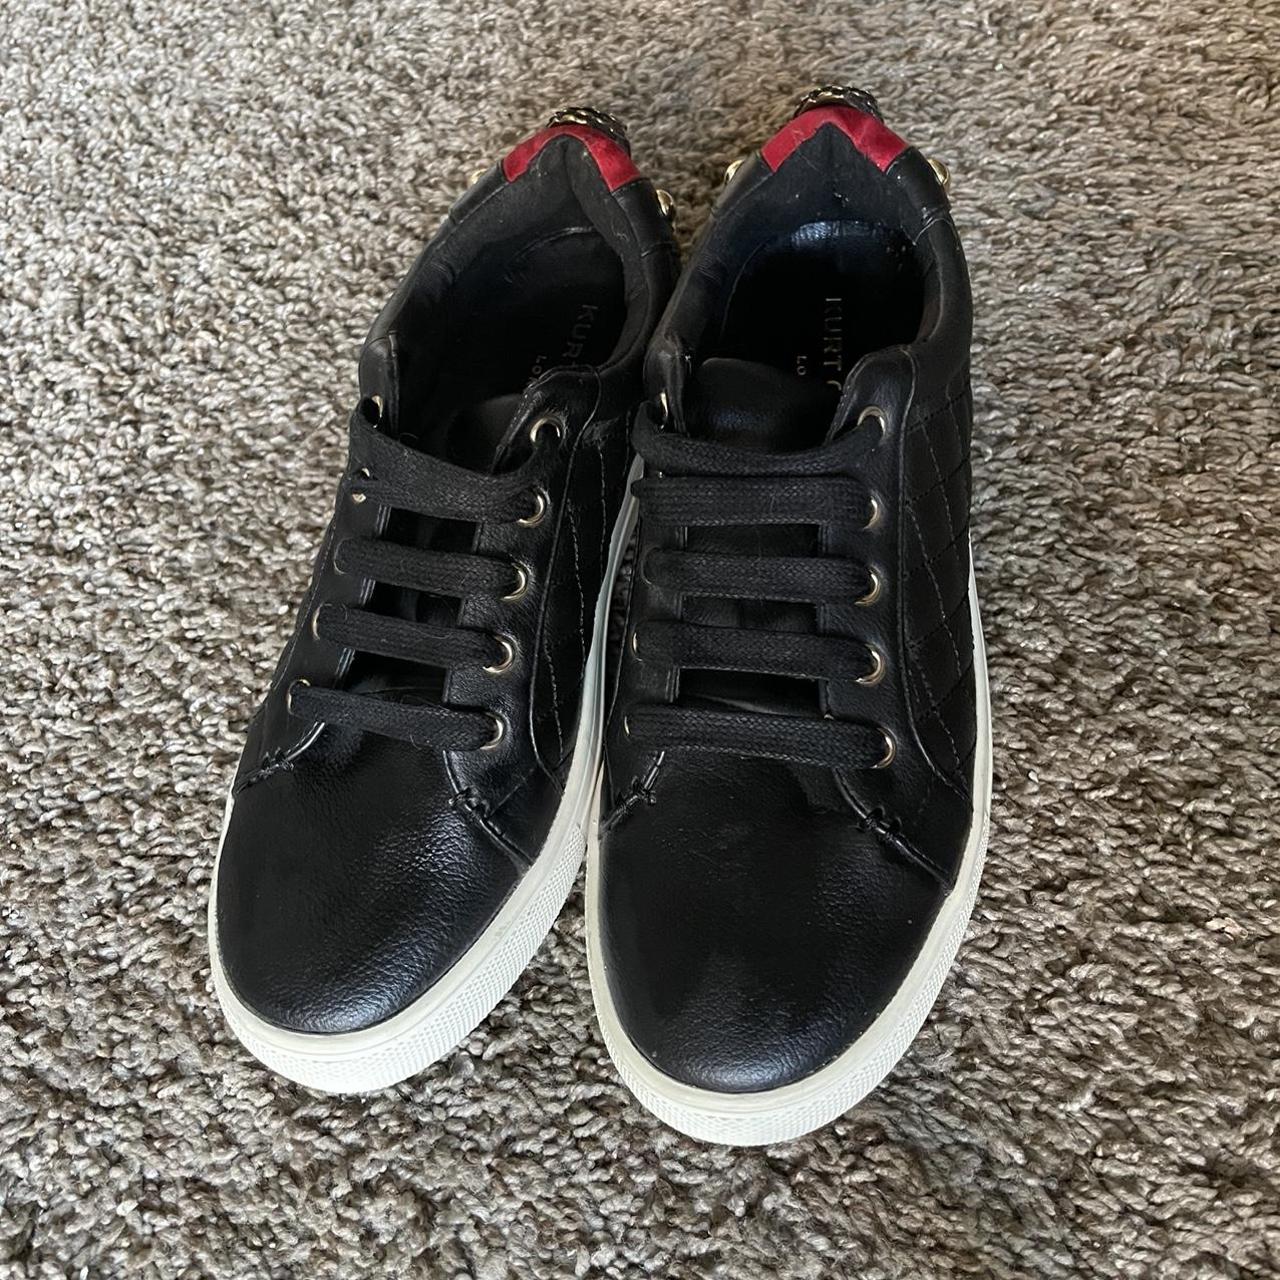 Kurt Geiger Women's Black and Red Trainers (2)